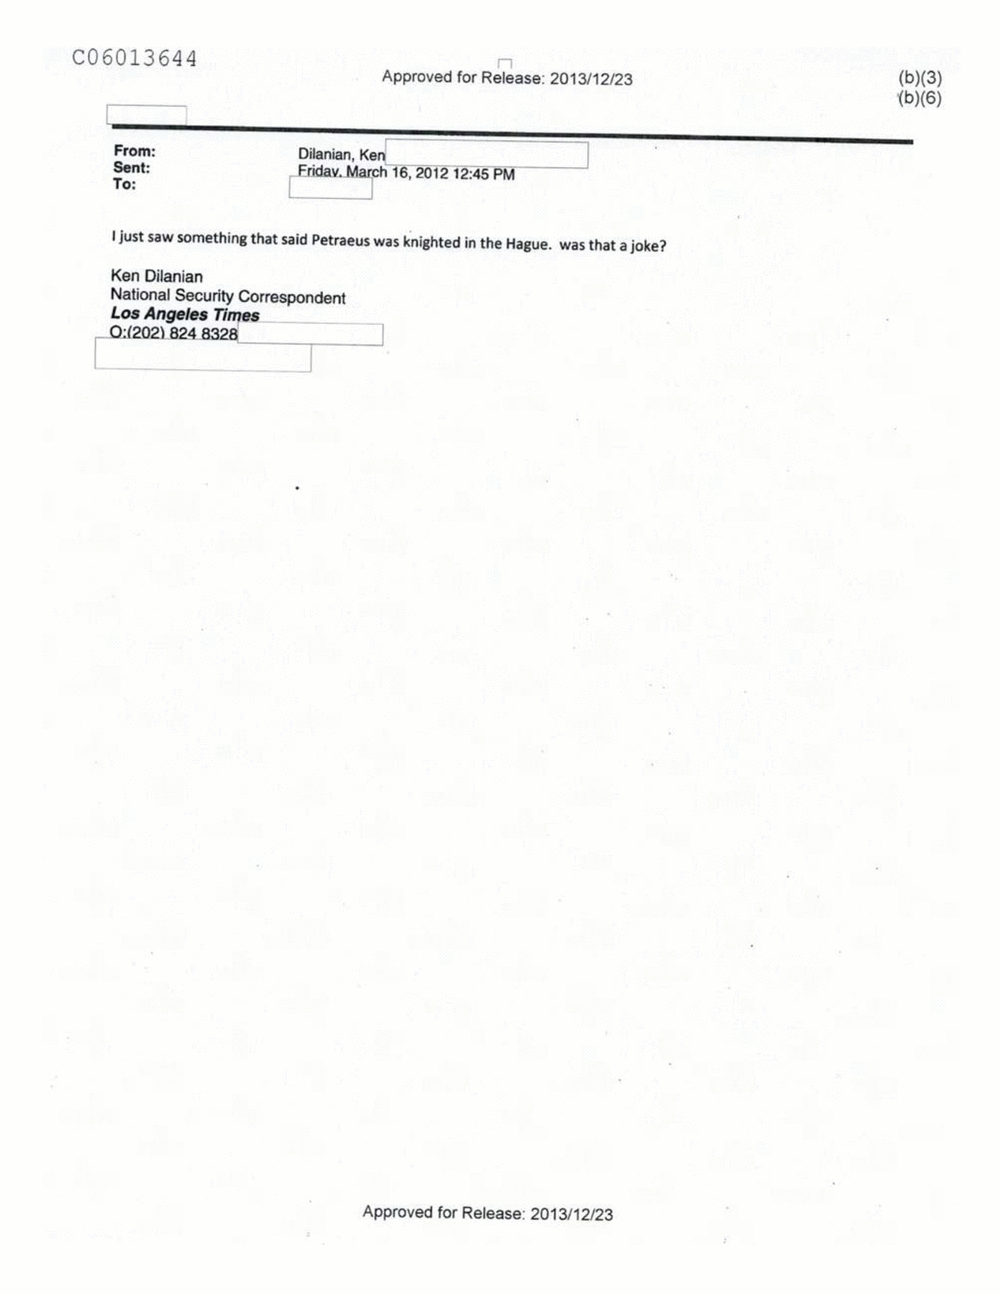 Page 485 from Email Correspondence Between Reporters and CIA Flacks